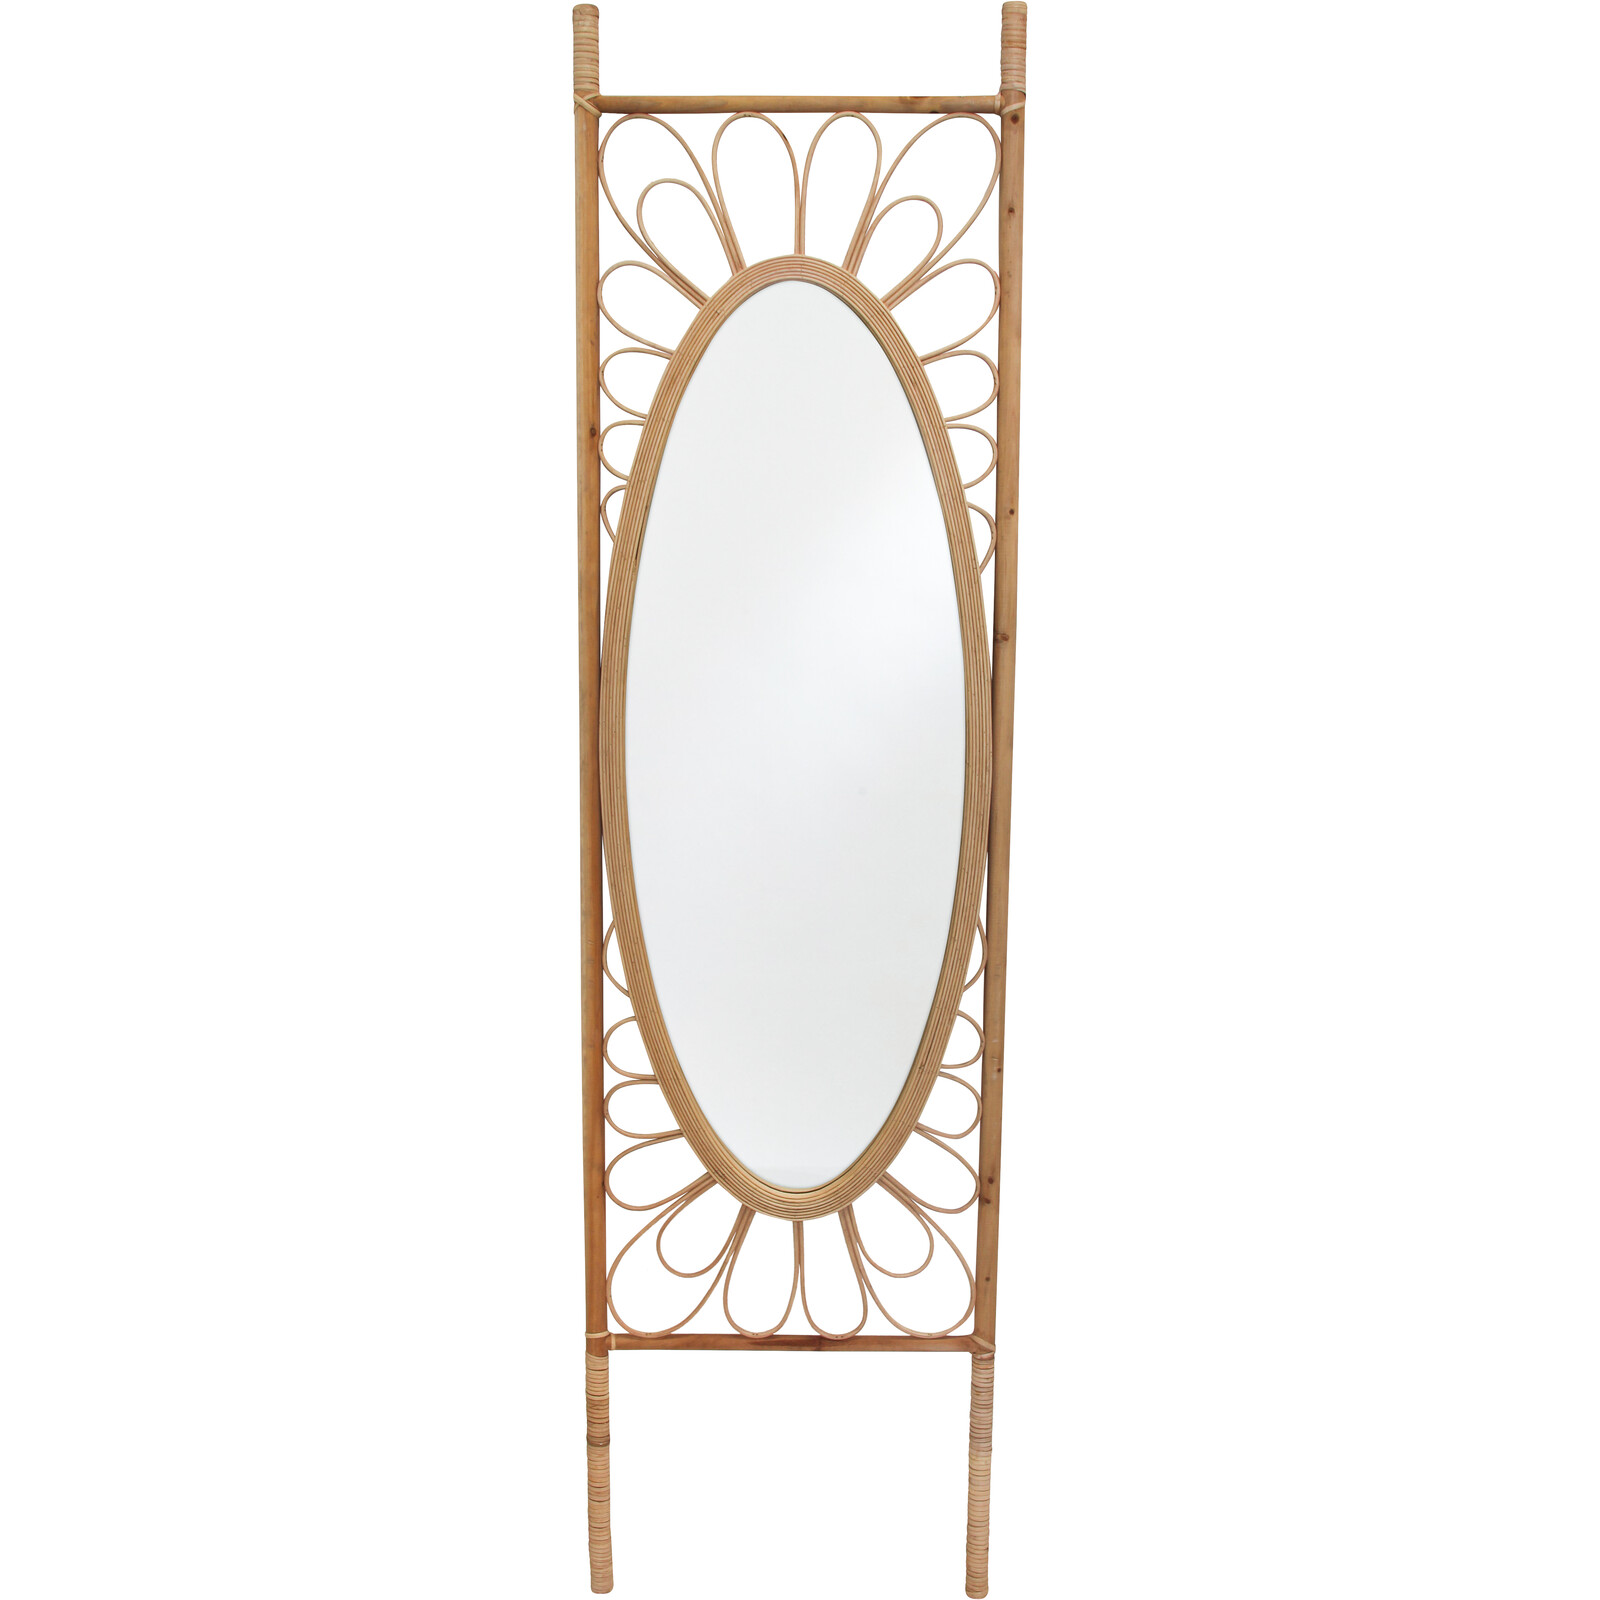 #Floor Mirror Leaning Natural